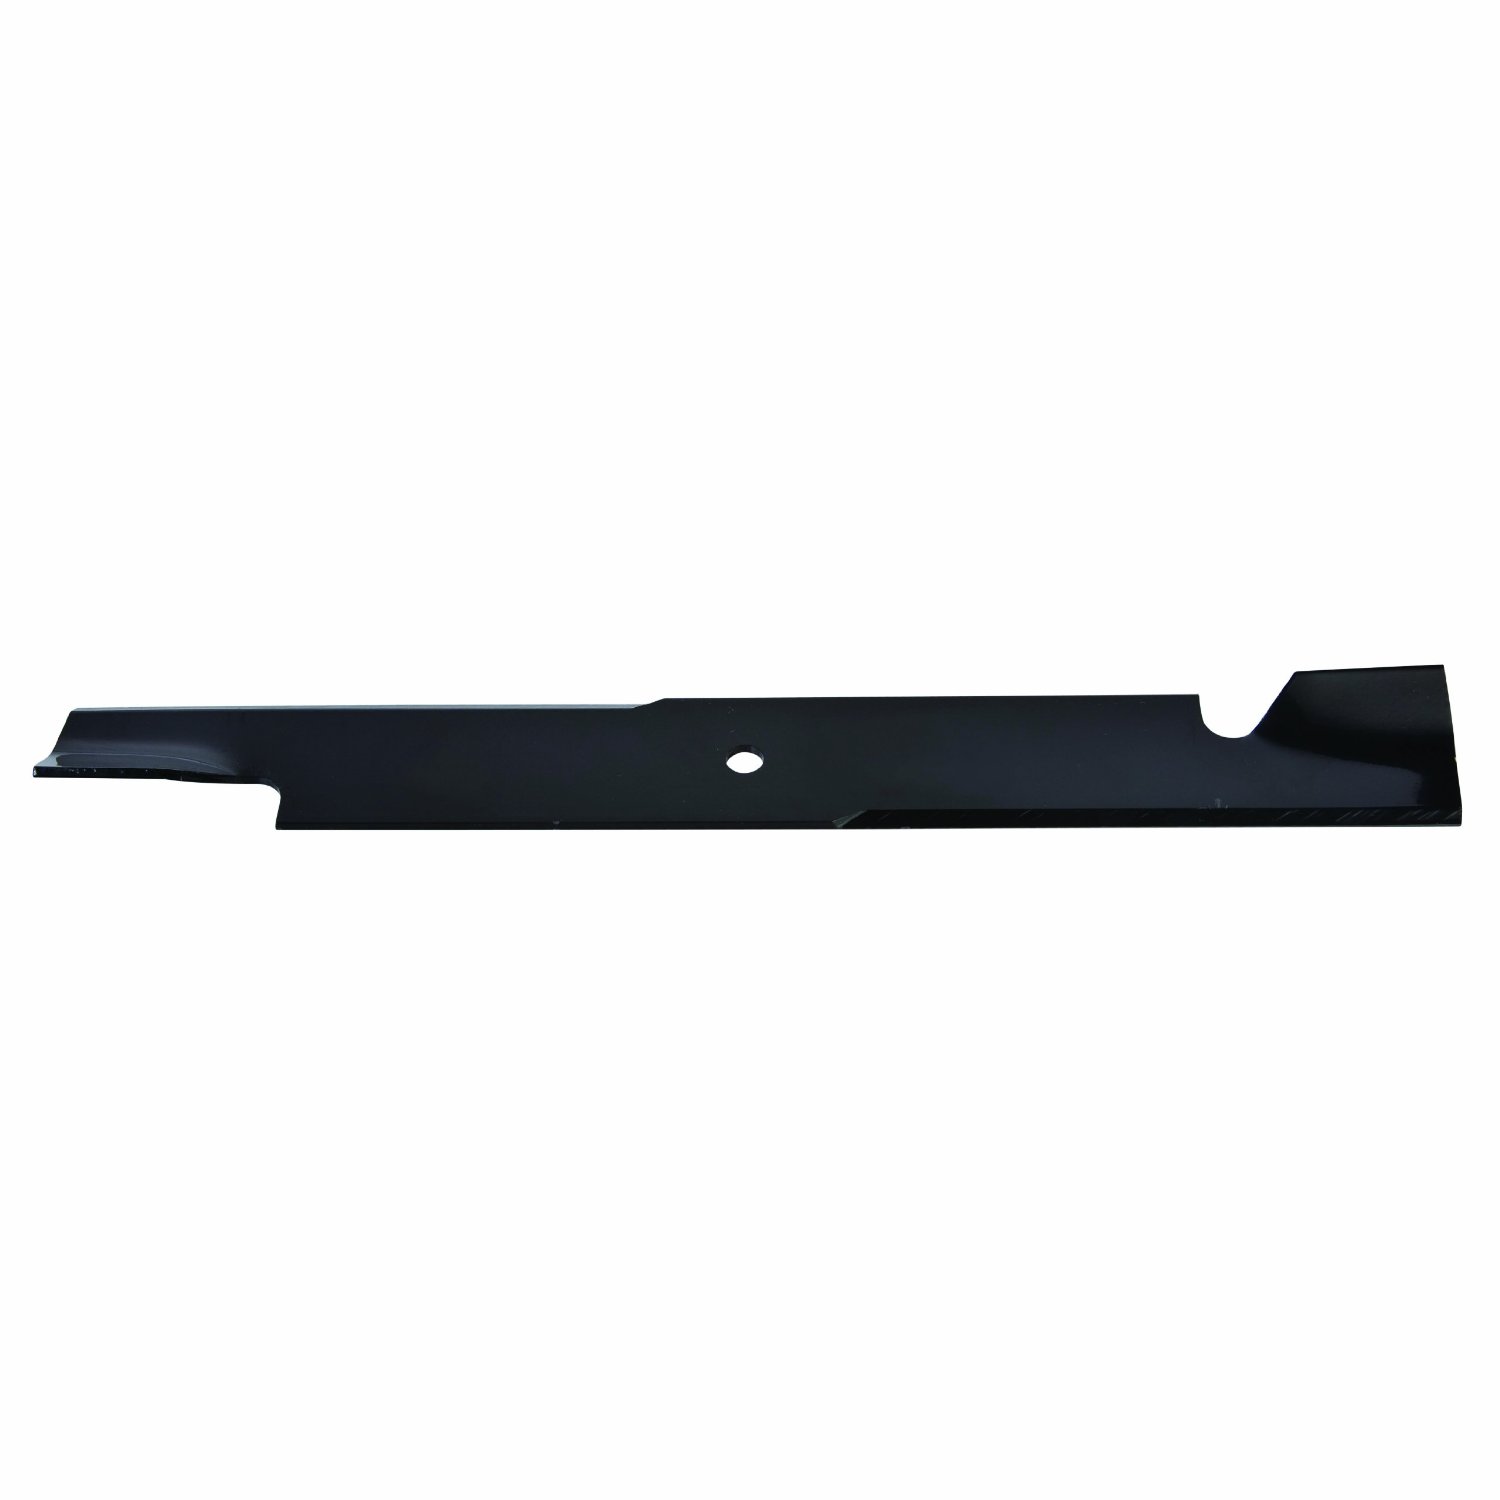 Oregon 91-374 Exmark Replacement Lawn Mower Blade 24-7/16-Inch - image 1 of 2